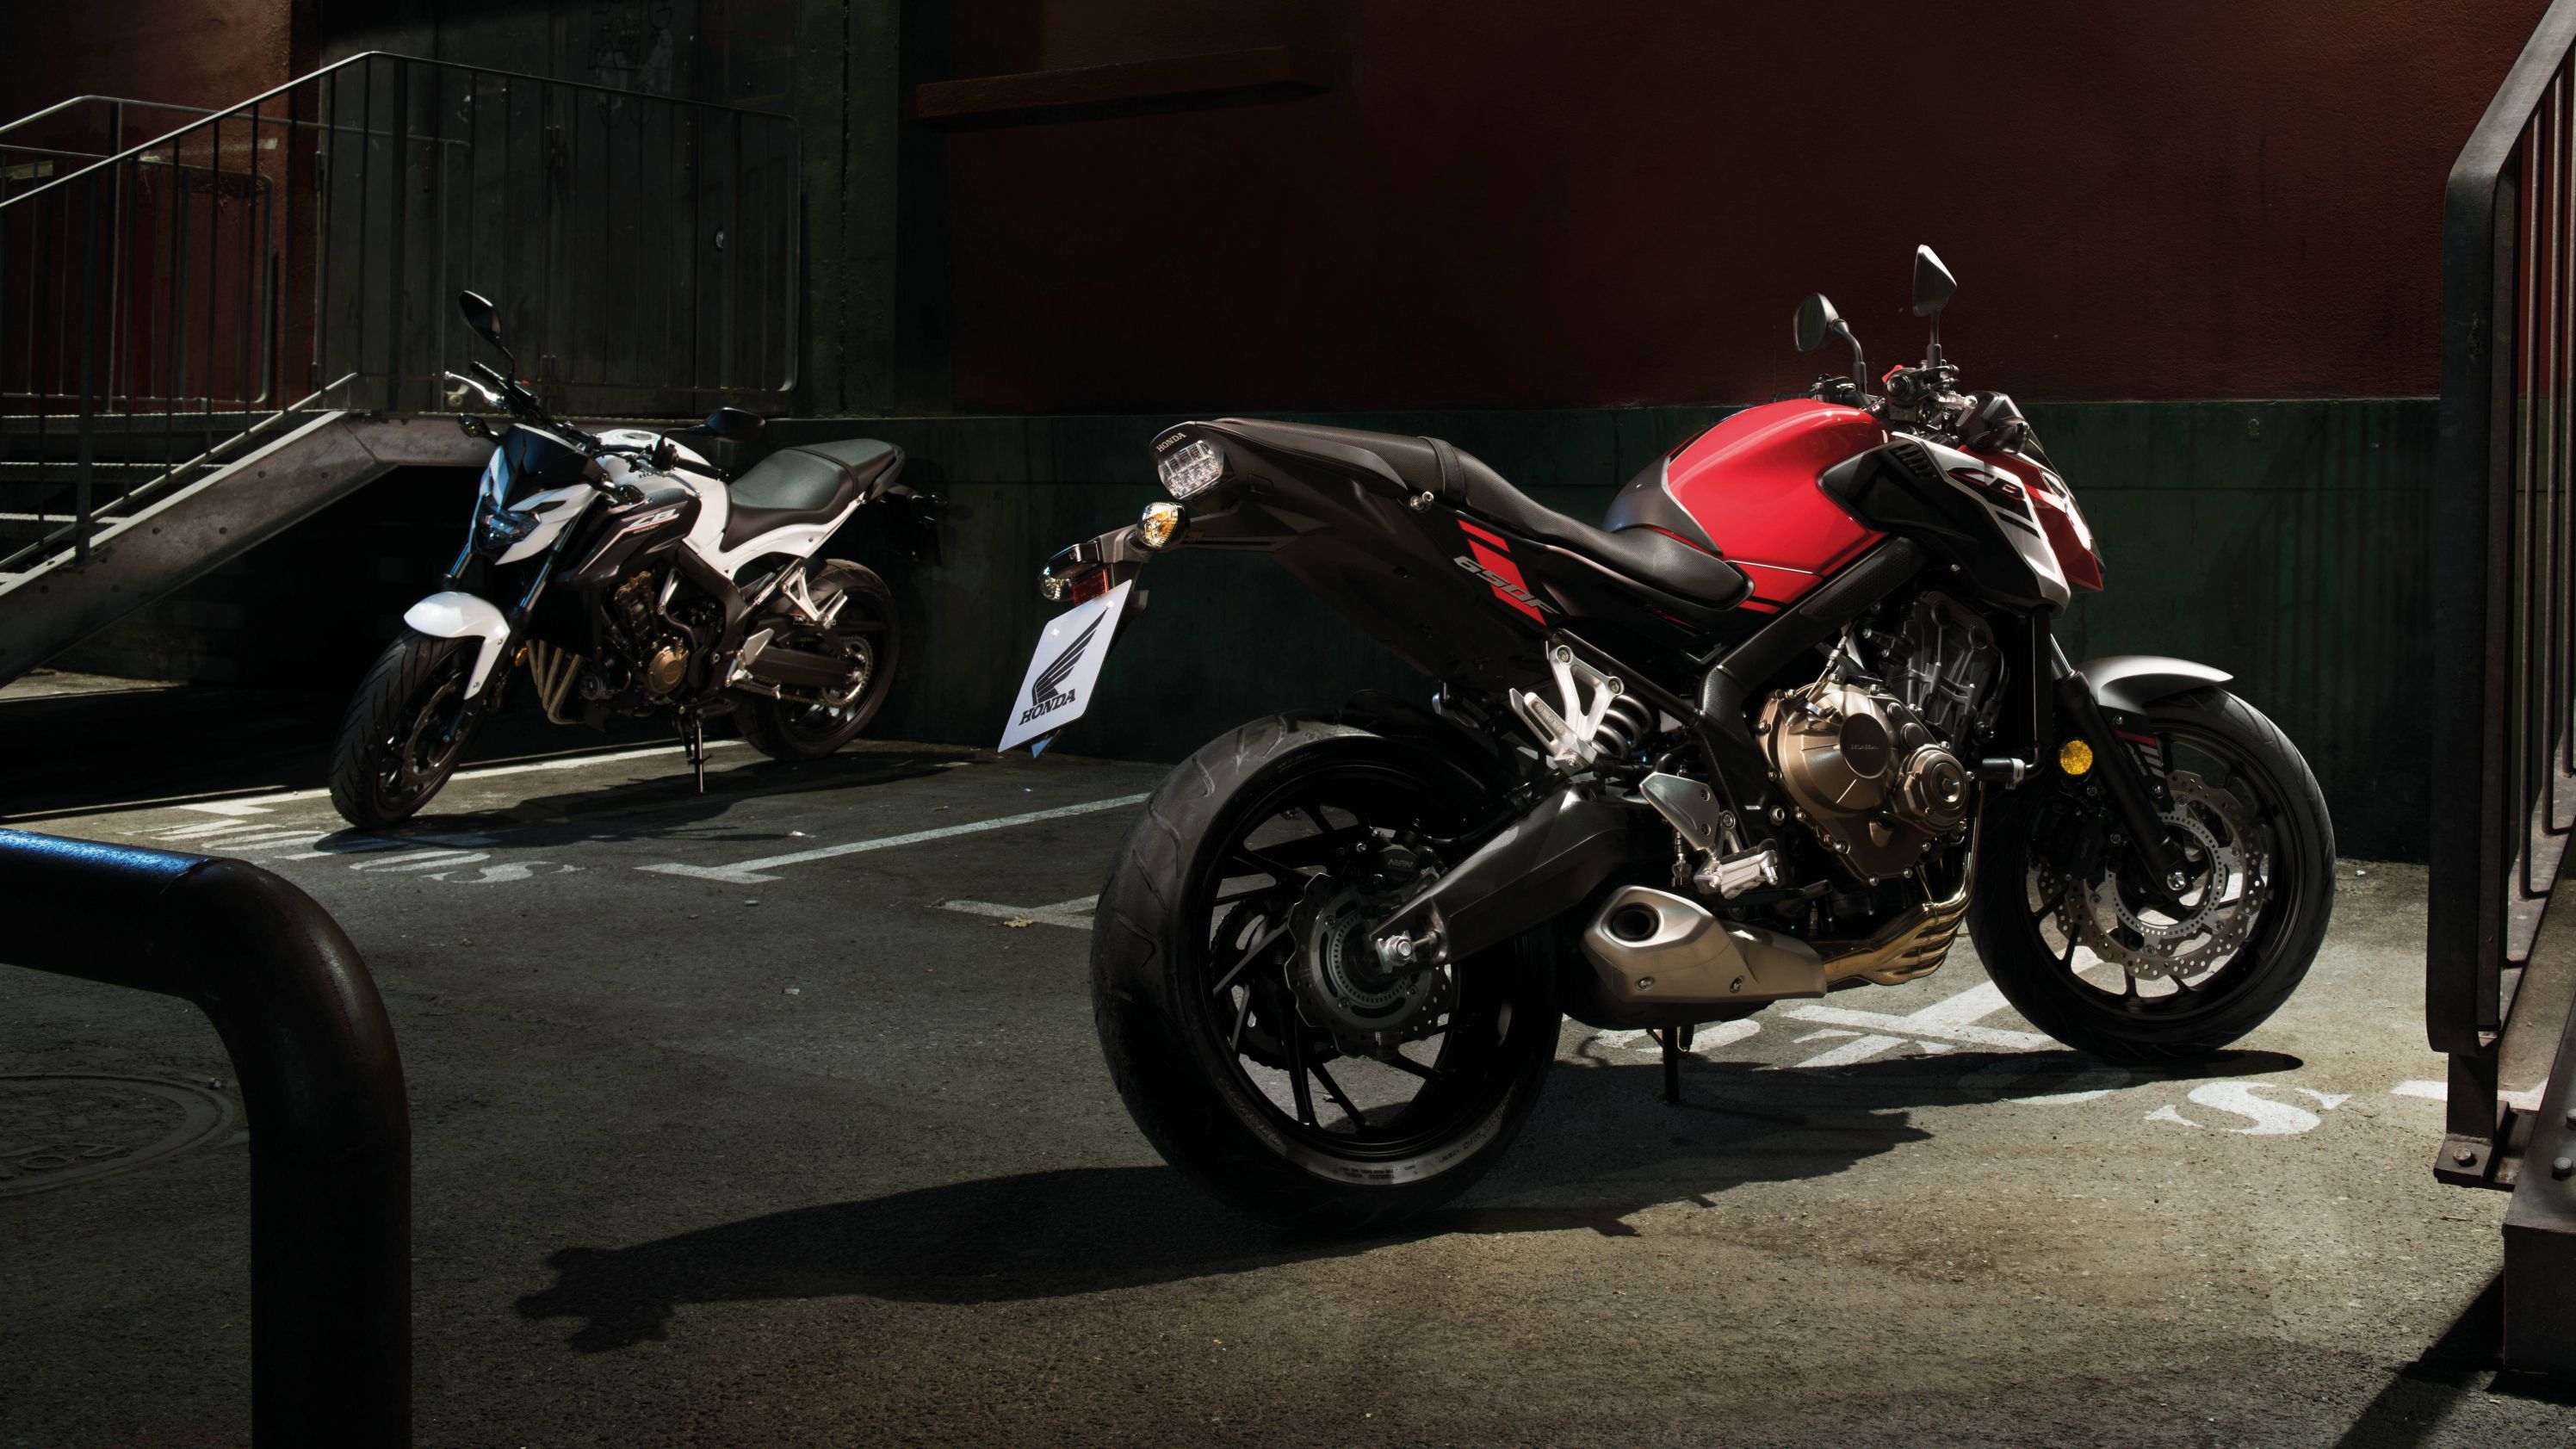 2018 Honda CB650F: How Does It Stack Up With The FZ-07 And SV650?